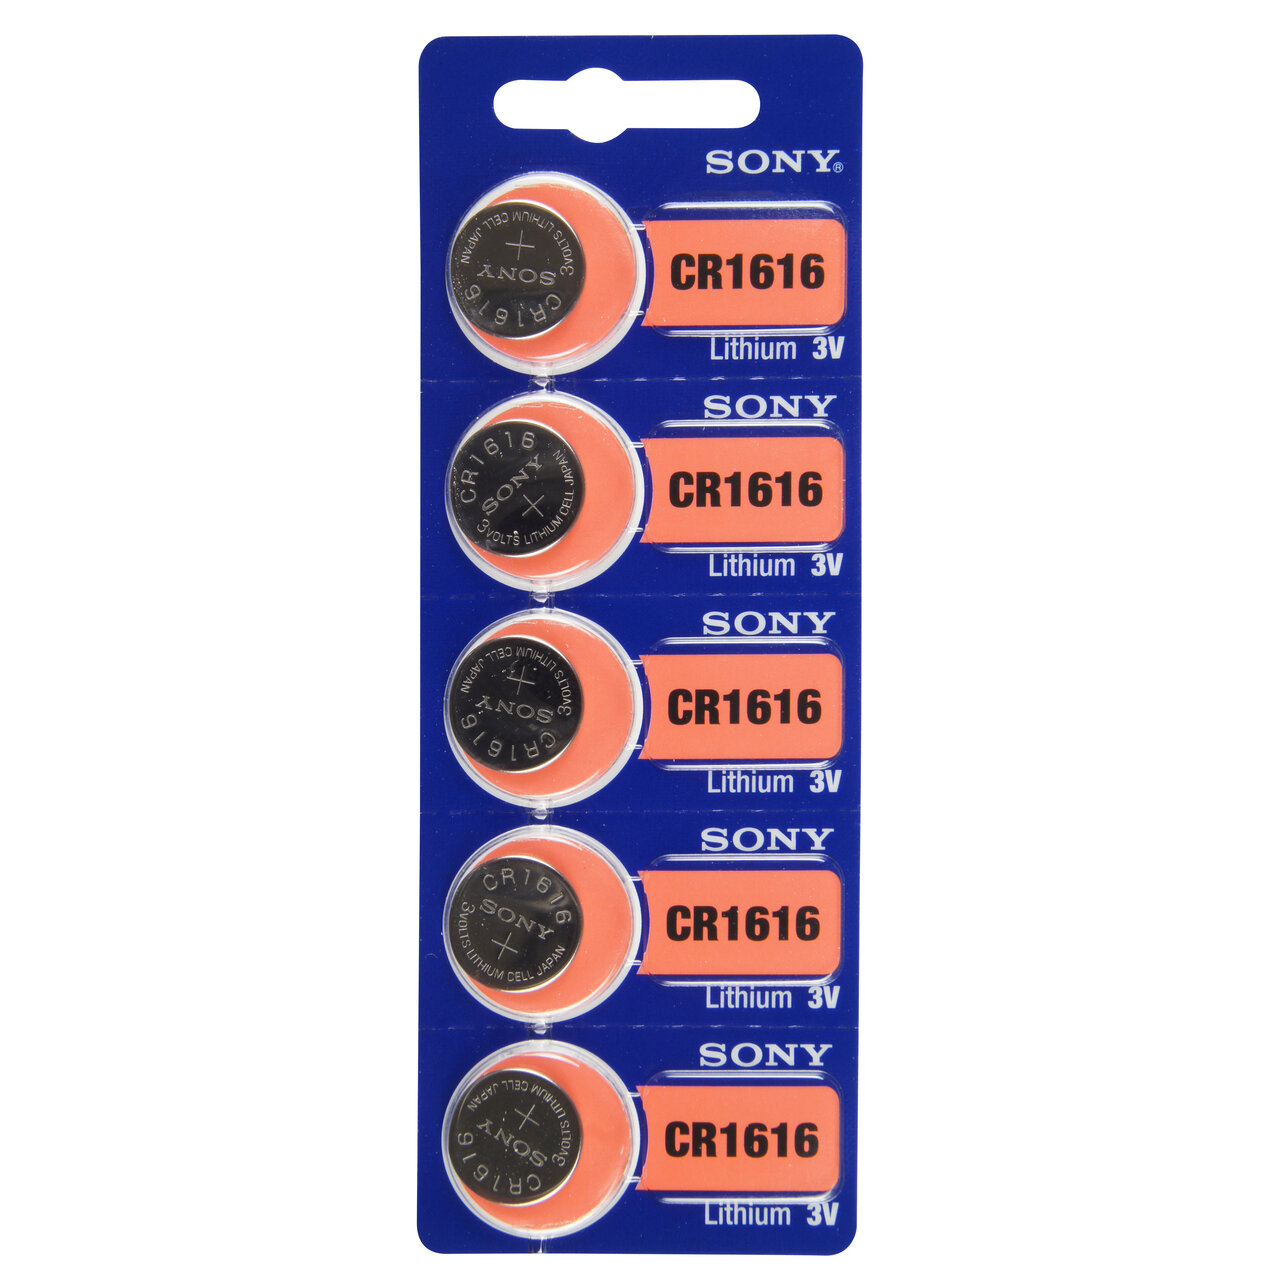 Type 1616 SONY Lithium Battery Tear Strip Pack of 5 SWB1616